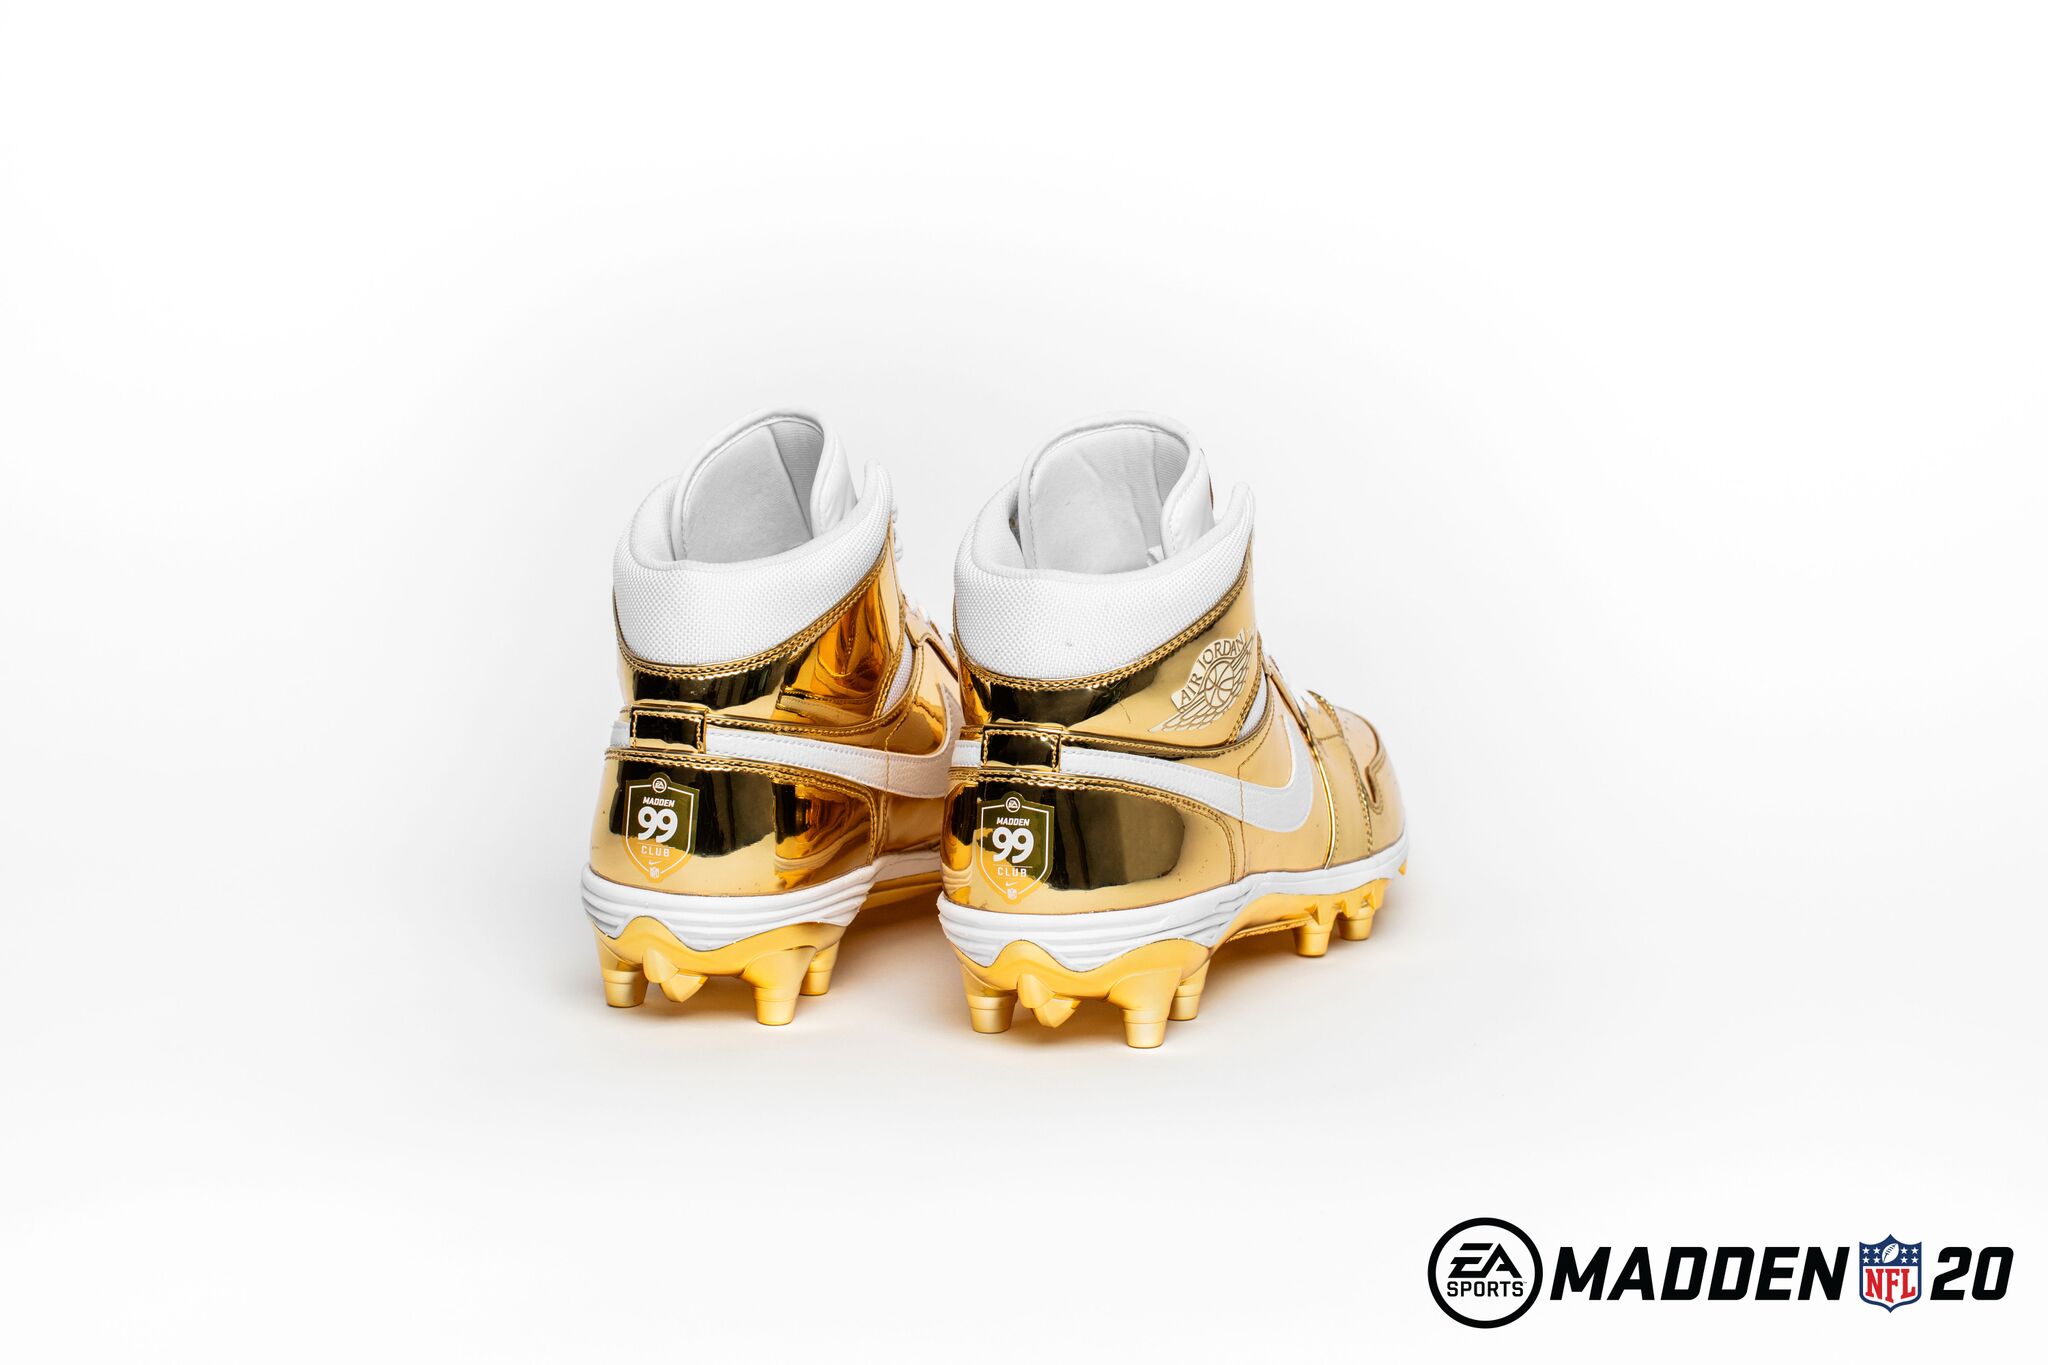 99 Club Gold Cleats sent to the highest rated players